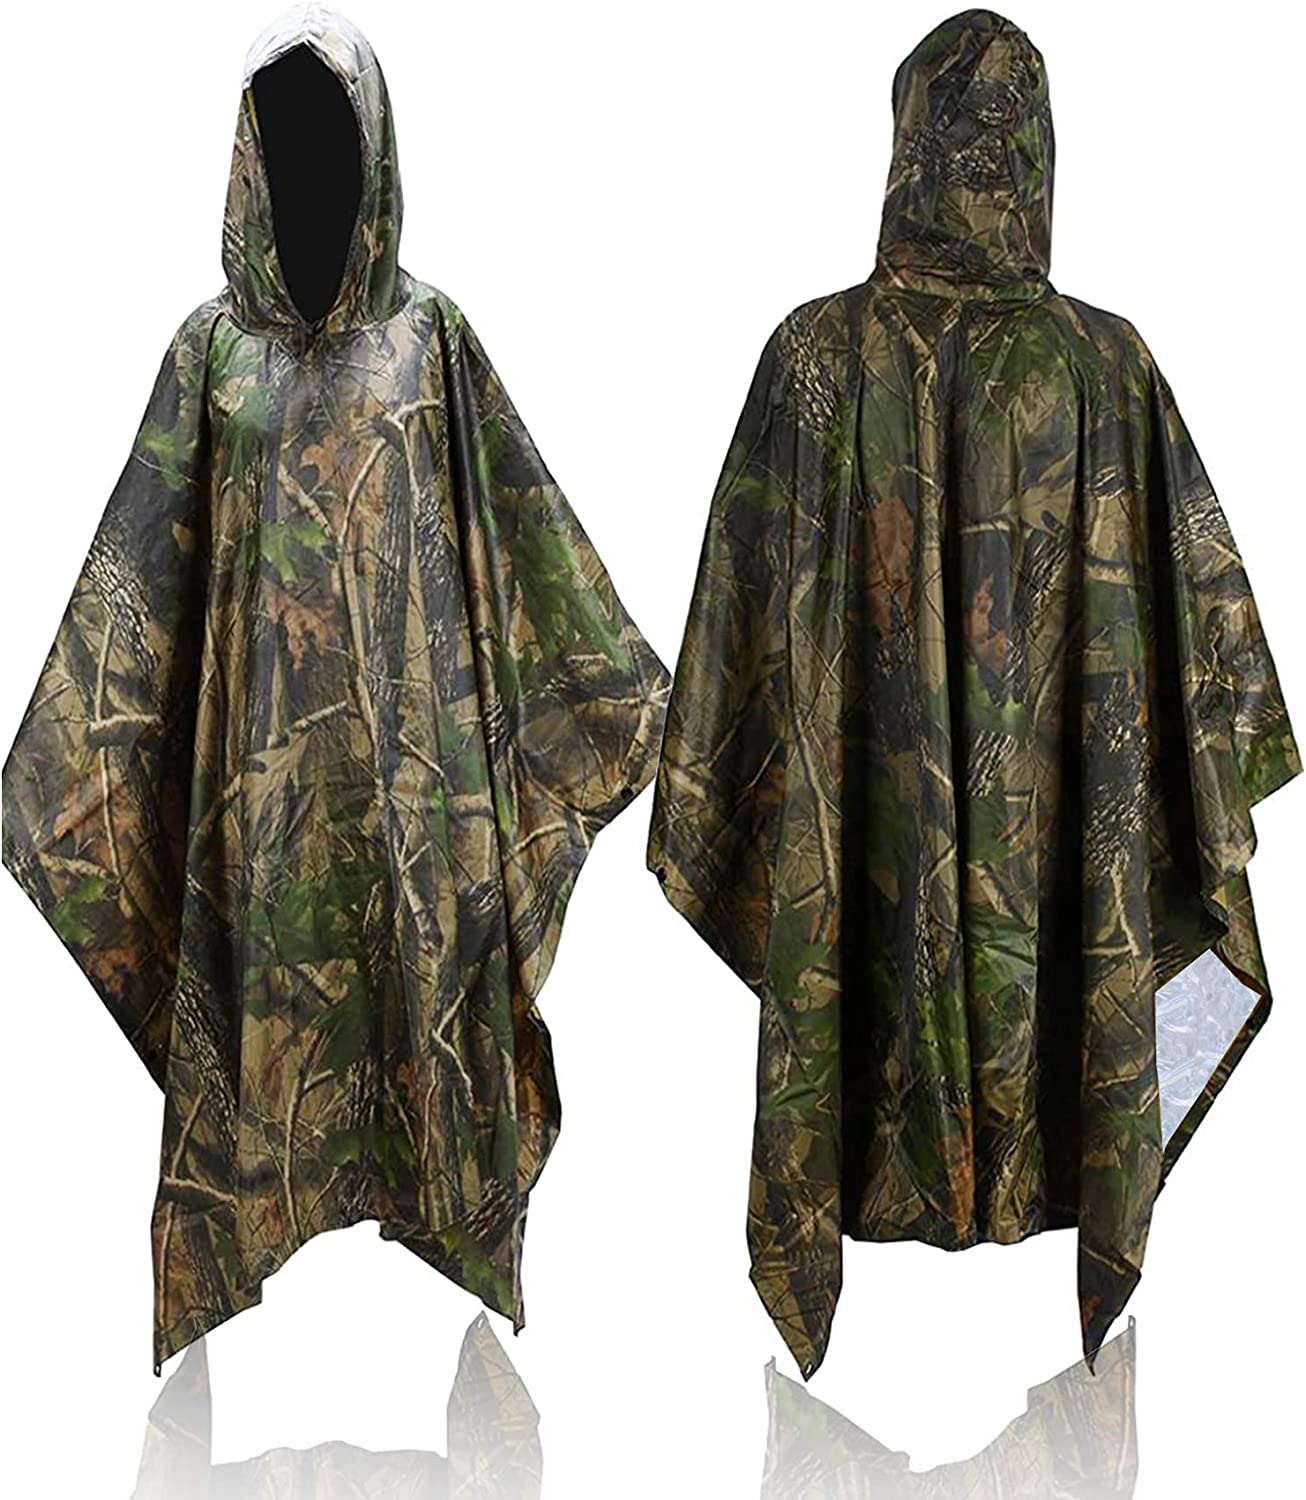 Favuit Camouflage Rain Poncho Ghillie Suit Waterproof Raincoat Military Army Style Poncho Multi Use Rip-Stop Shelter Tent